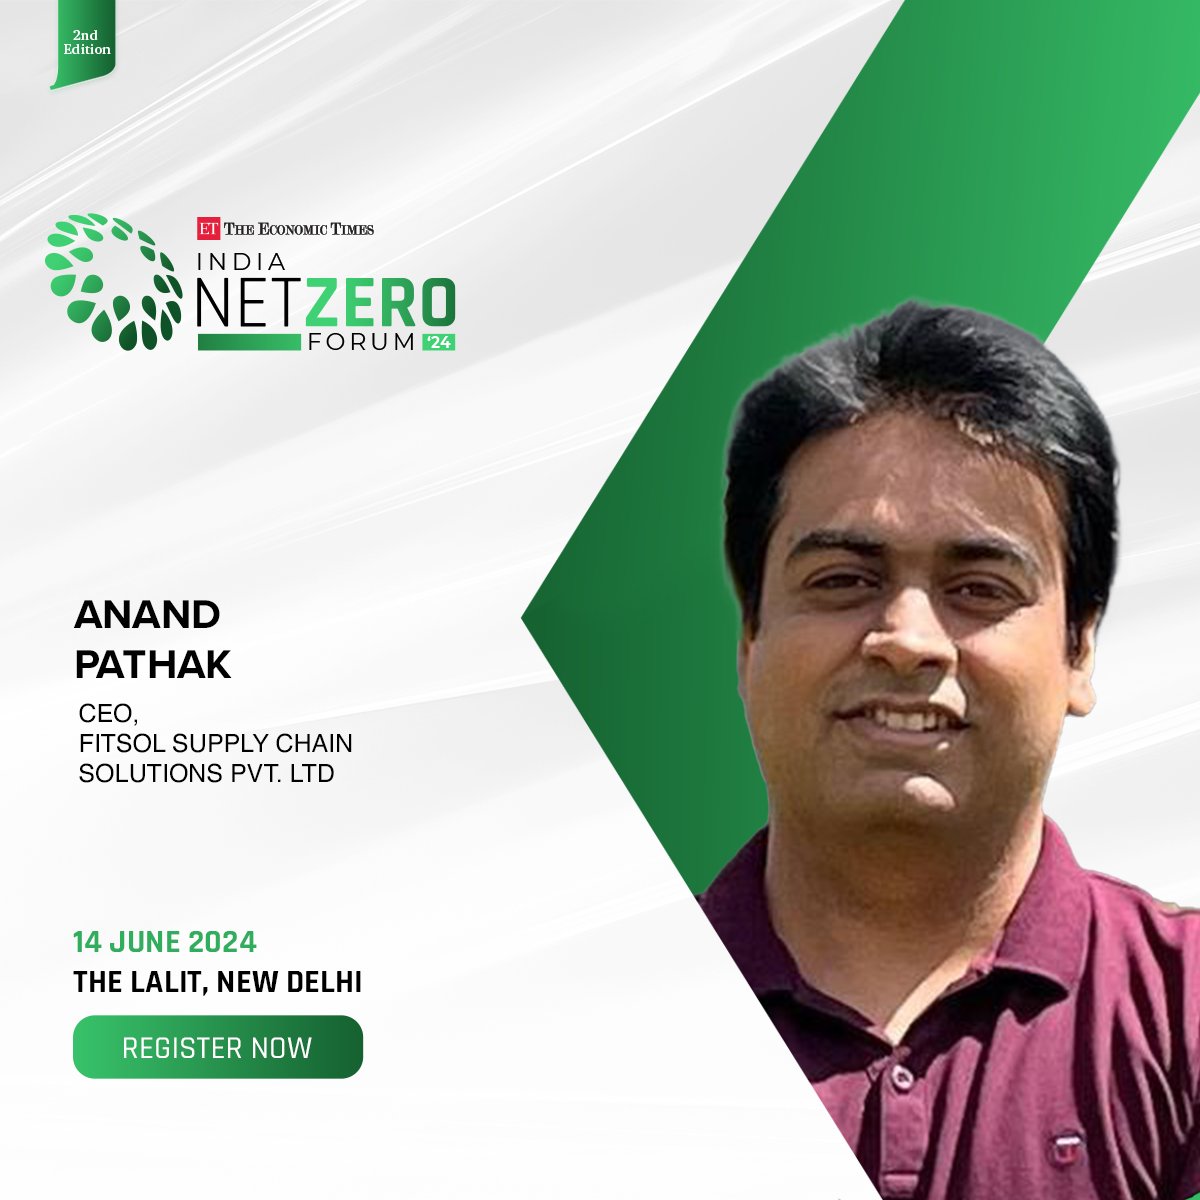 #SpeakerAnnouncement Anand Pathak, CEO, Fitsol Supply Chain Solutions Pvt. Ltd joins us at #ETIndiaNetZero to explore the pivotal nexus of economic growth, technology, and sustainability. Register Now: bit.ly/4a9Nbek #ETEnergyWorld #energy #sustainability #future